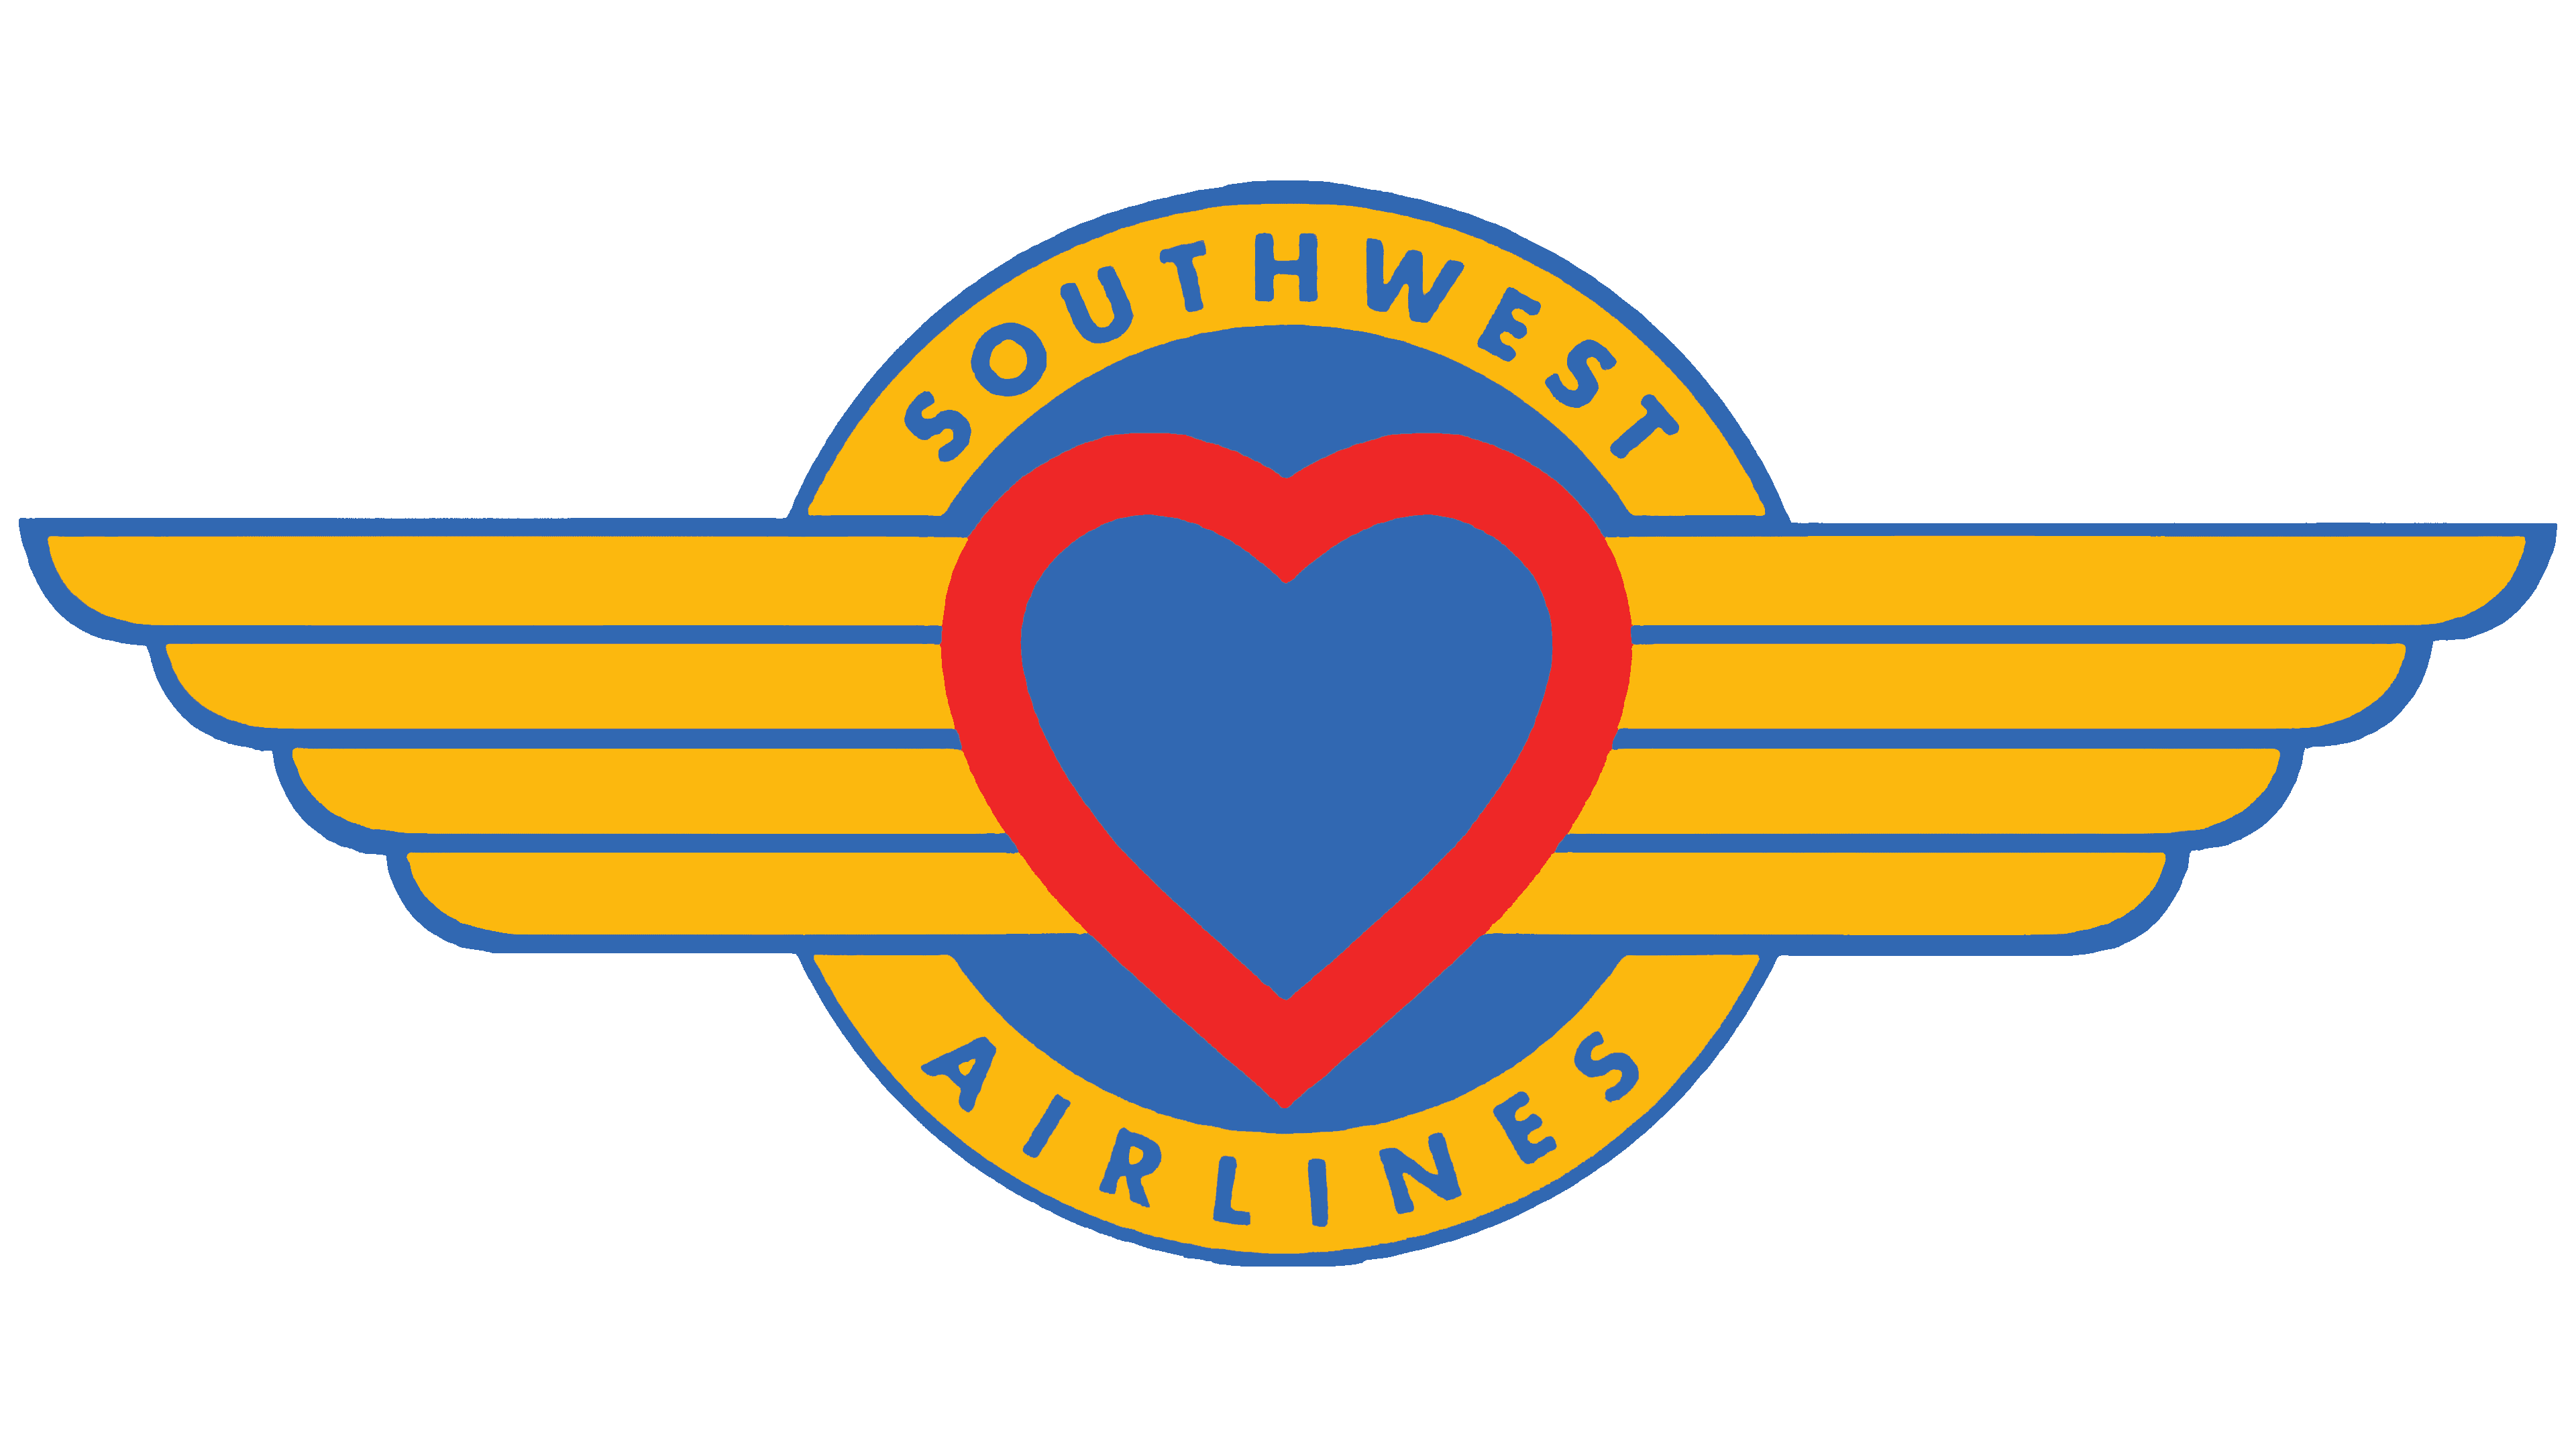 Southwest Airlines Logo History Evolution And Color C - vrogue.co